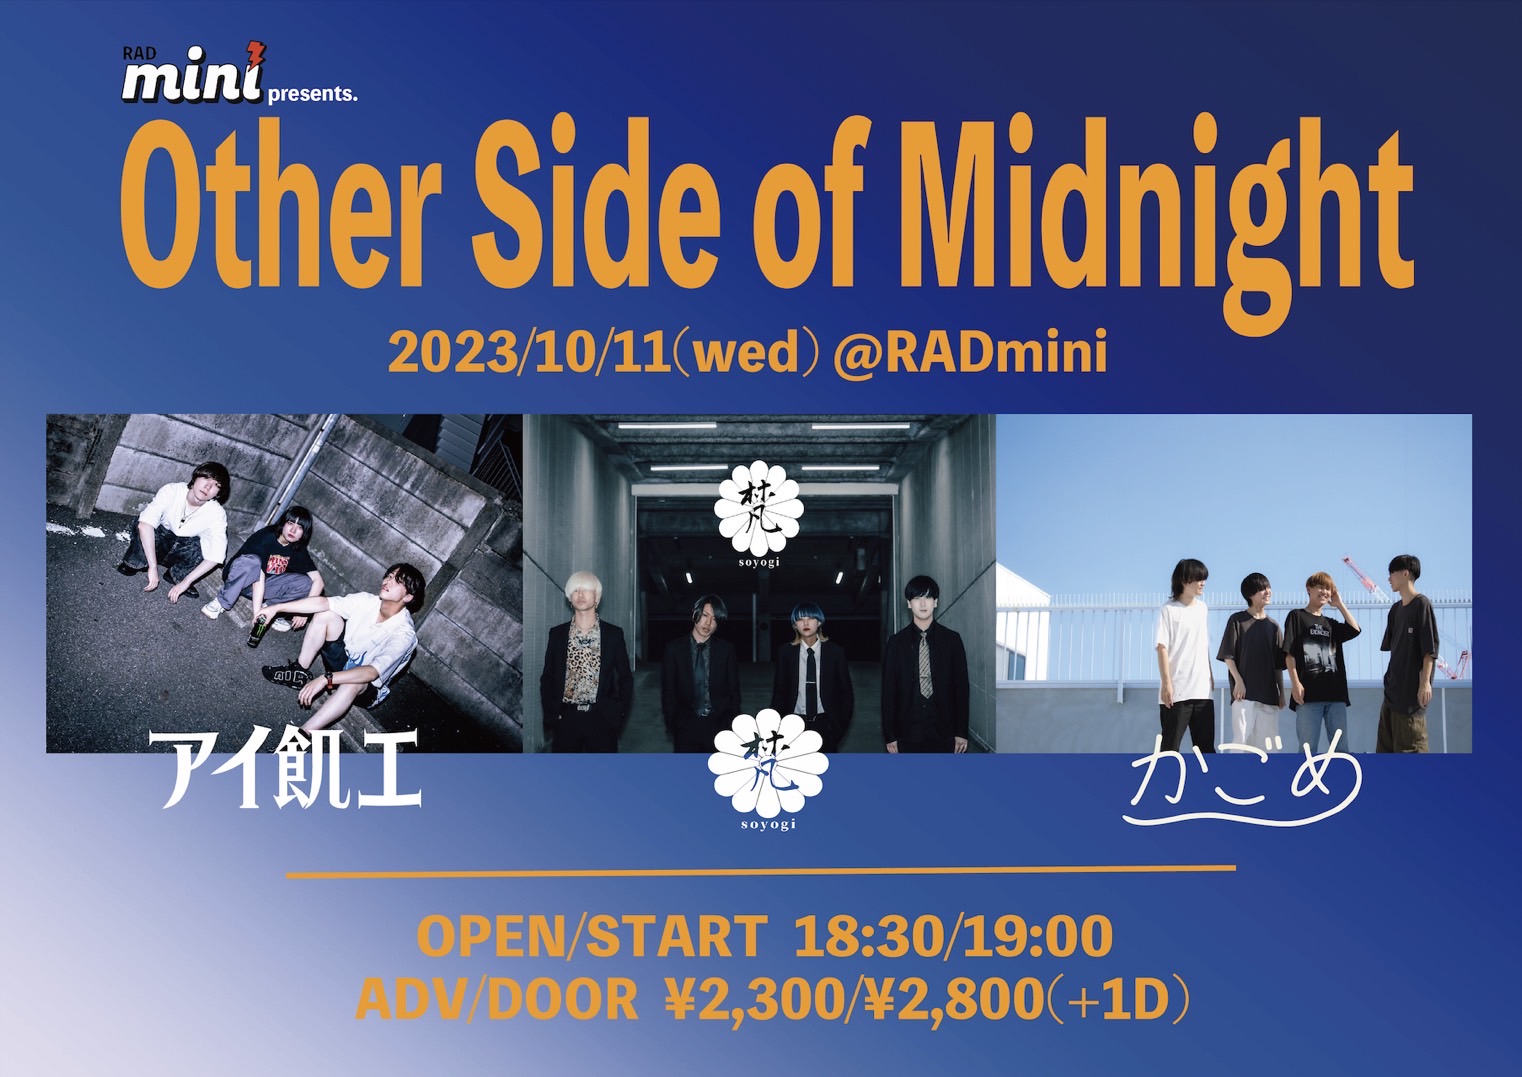 RADmini pre. 『Other Side of Midnight』